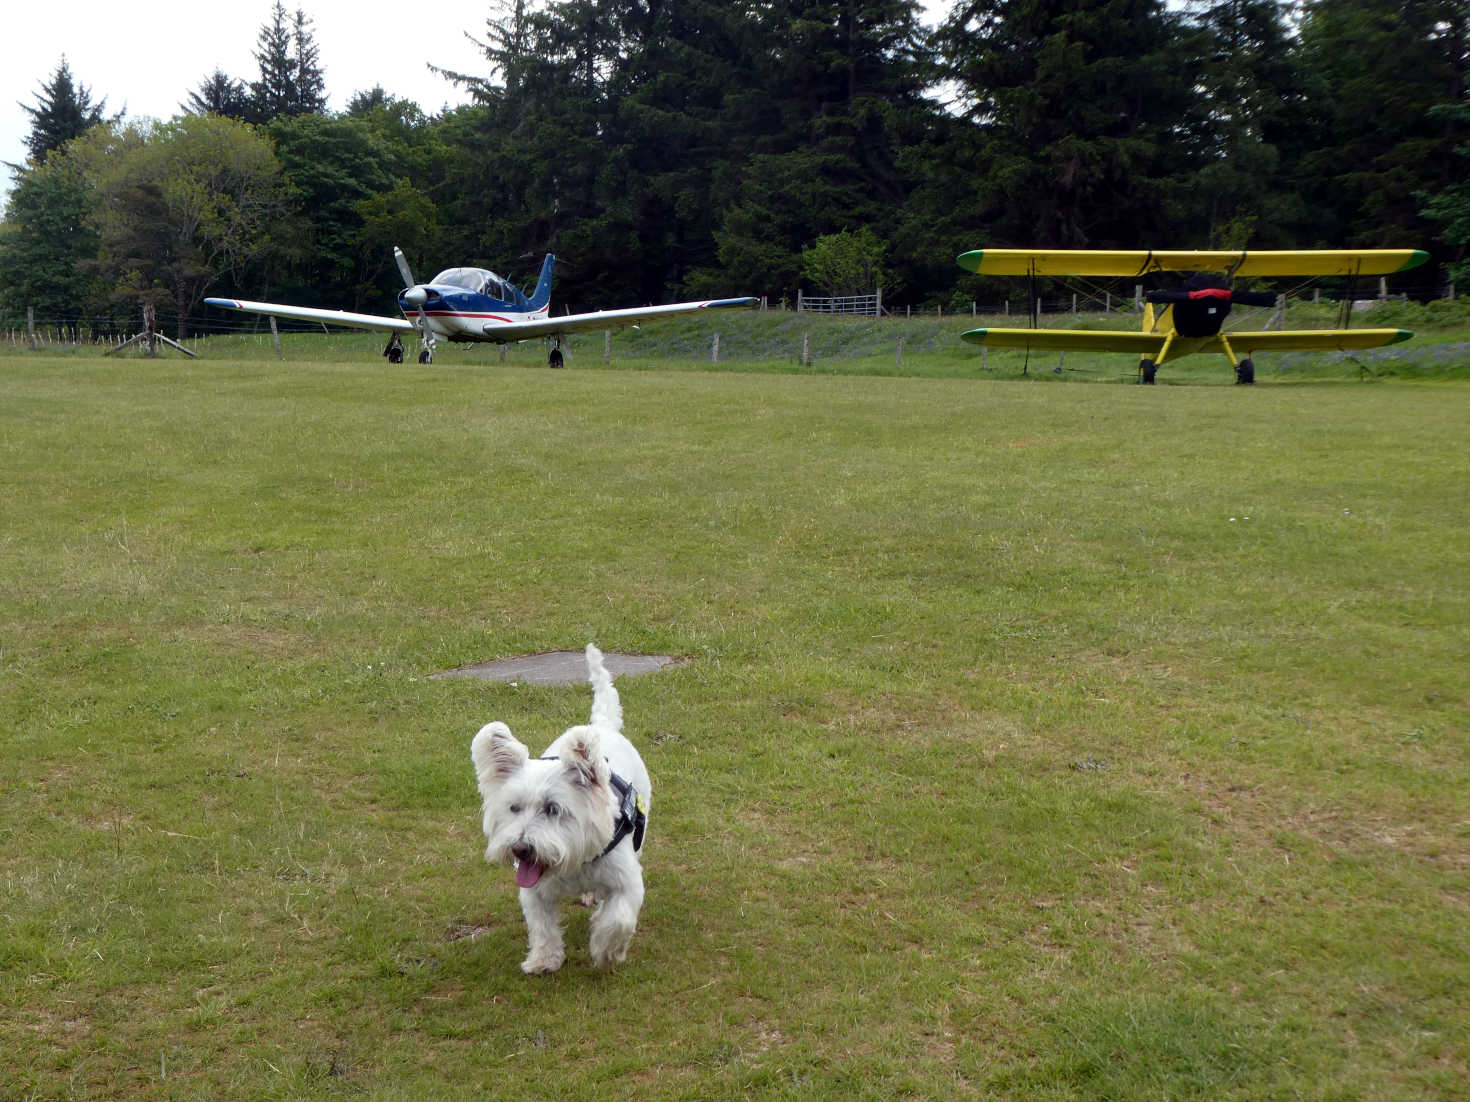 Poppy the Westie checks out the plains at Glenforsa Airfield